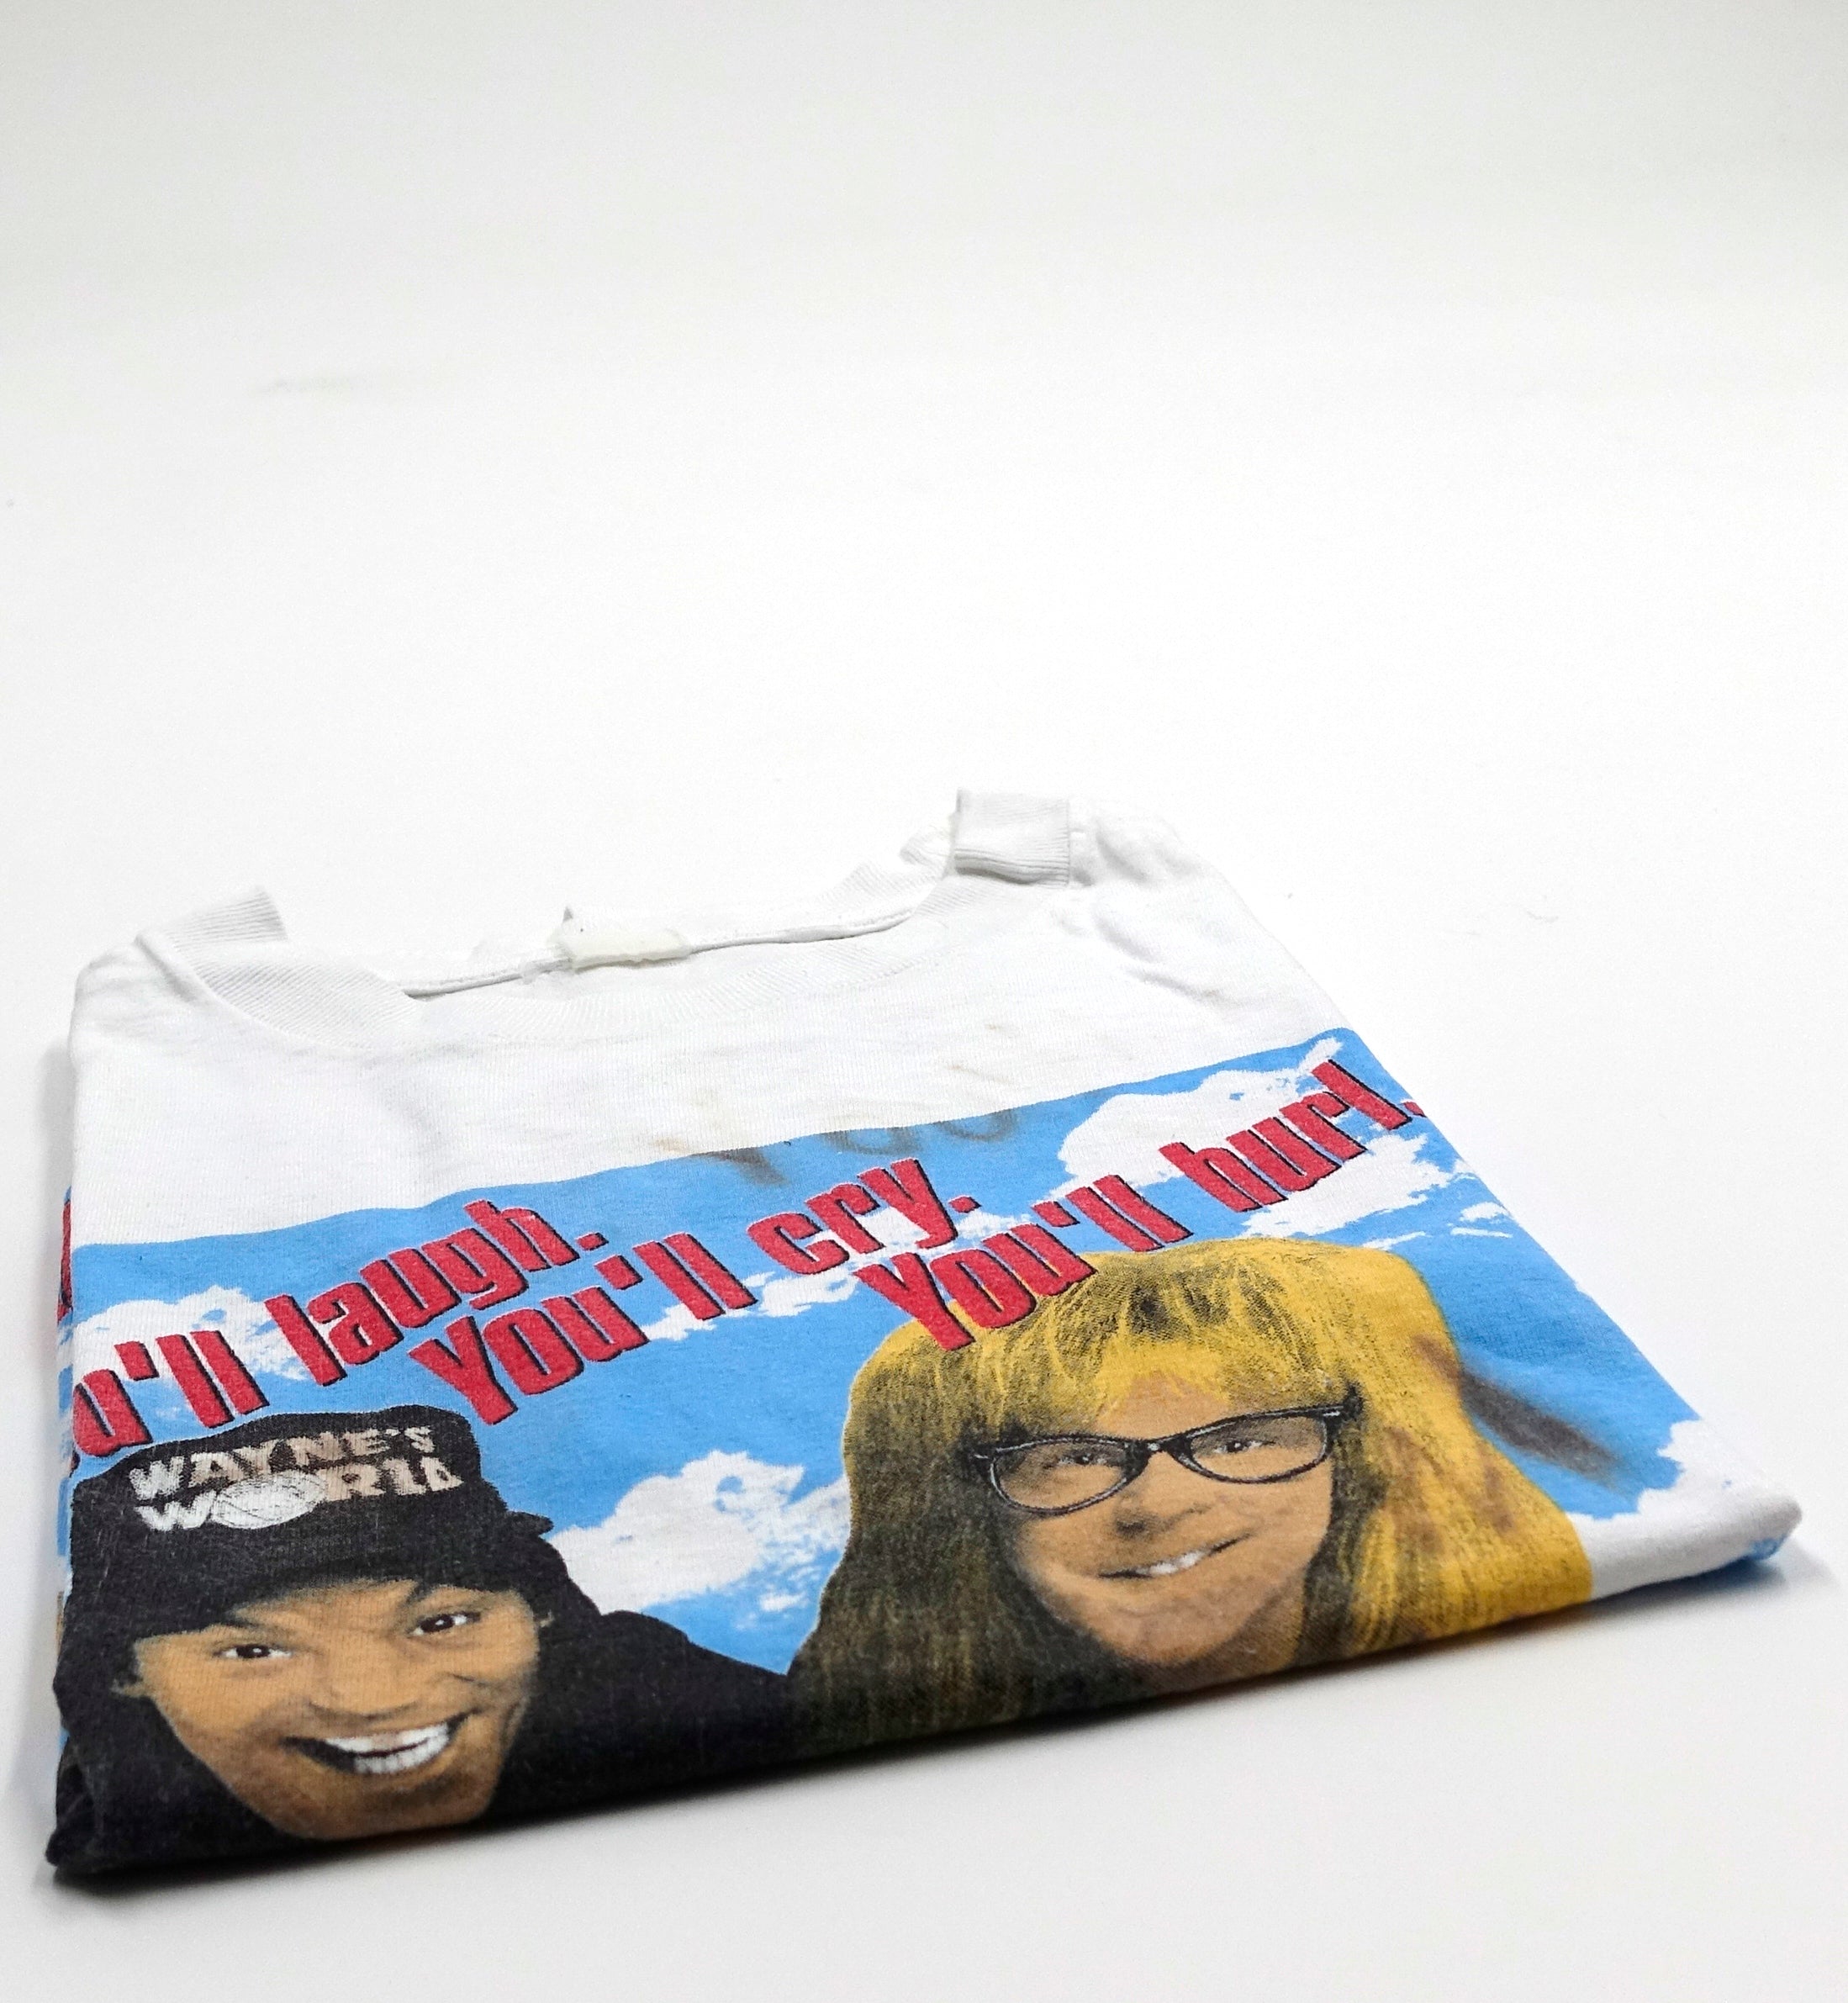 Wayne's World - You'll Laugh, You'll Cry, You'll Hurl Motion Picture Shirt Size Medium